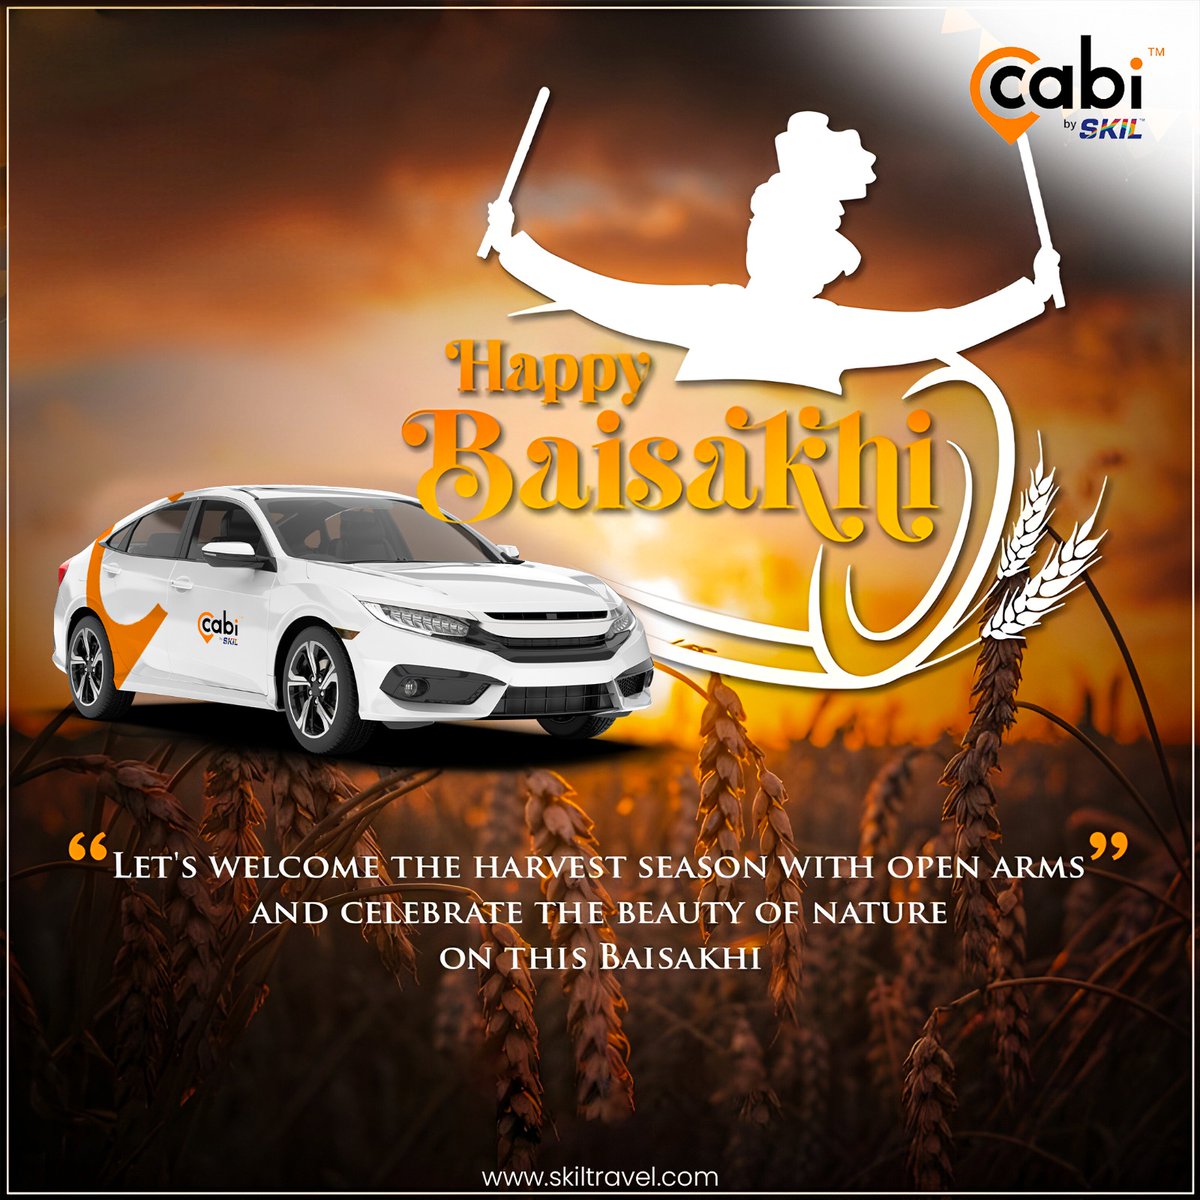 🌾 Warm Wishes for a Prosperous Baisakhi! 🎉 Today, we celebrate Baisakhi, a festival that signifies new beginnings, bountiful harvests, and the importance of community. 🌟 #CABI #CabibySKIL #corporatecab #vaisakhi #baisakhi #happybaisakhi #punjab #festival #indianfestival